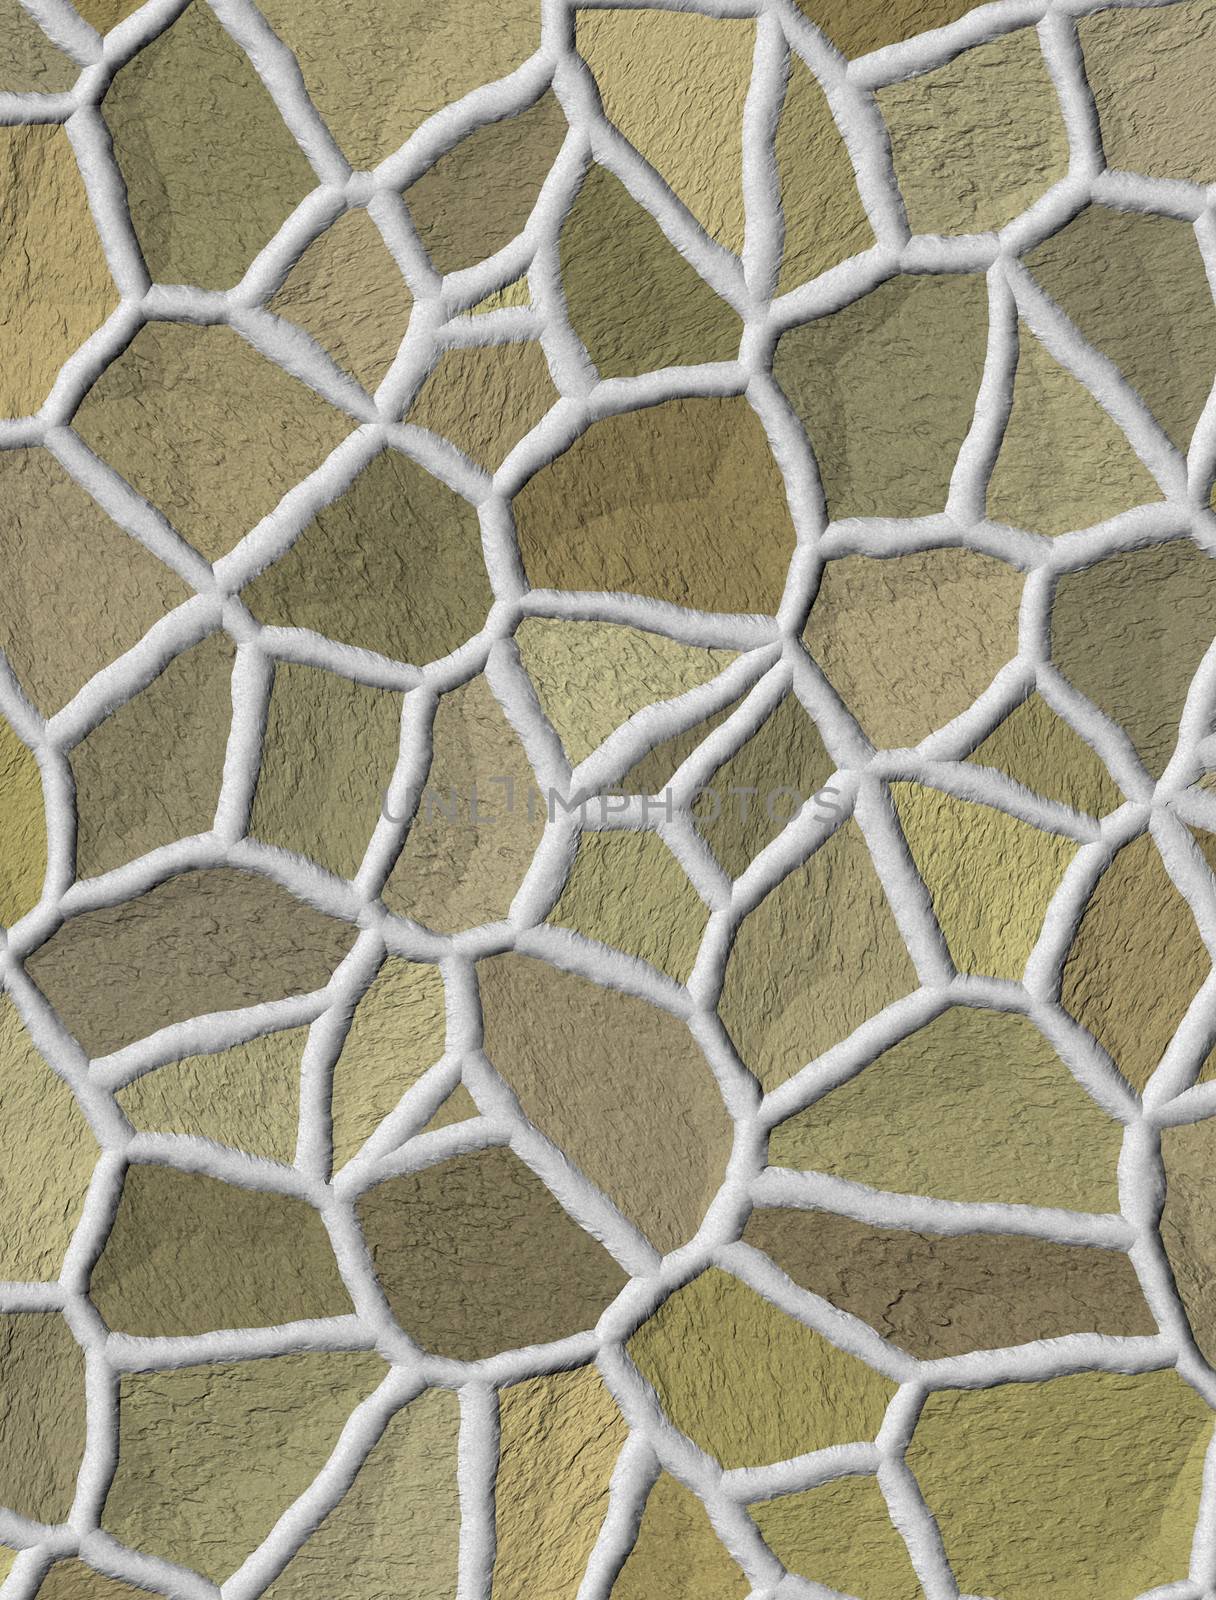 the marble-stone mosaic texture